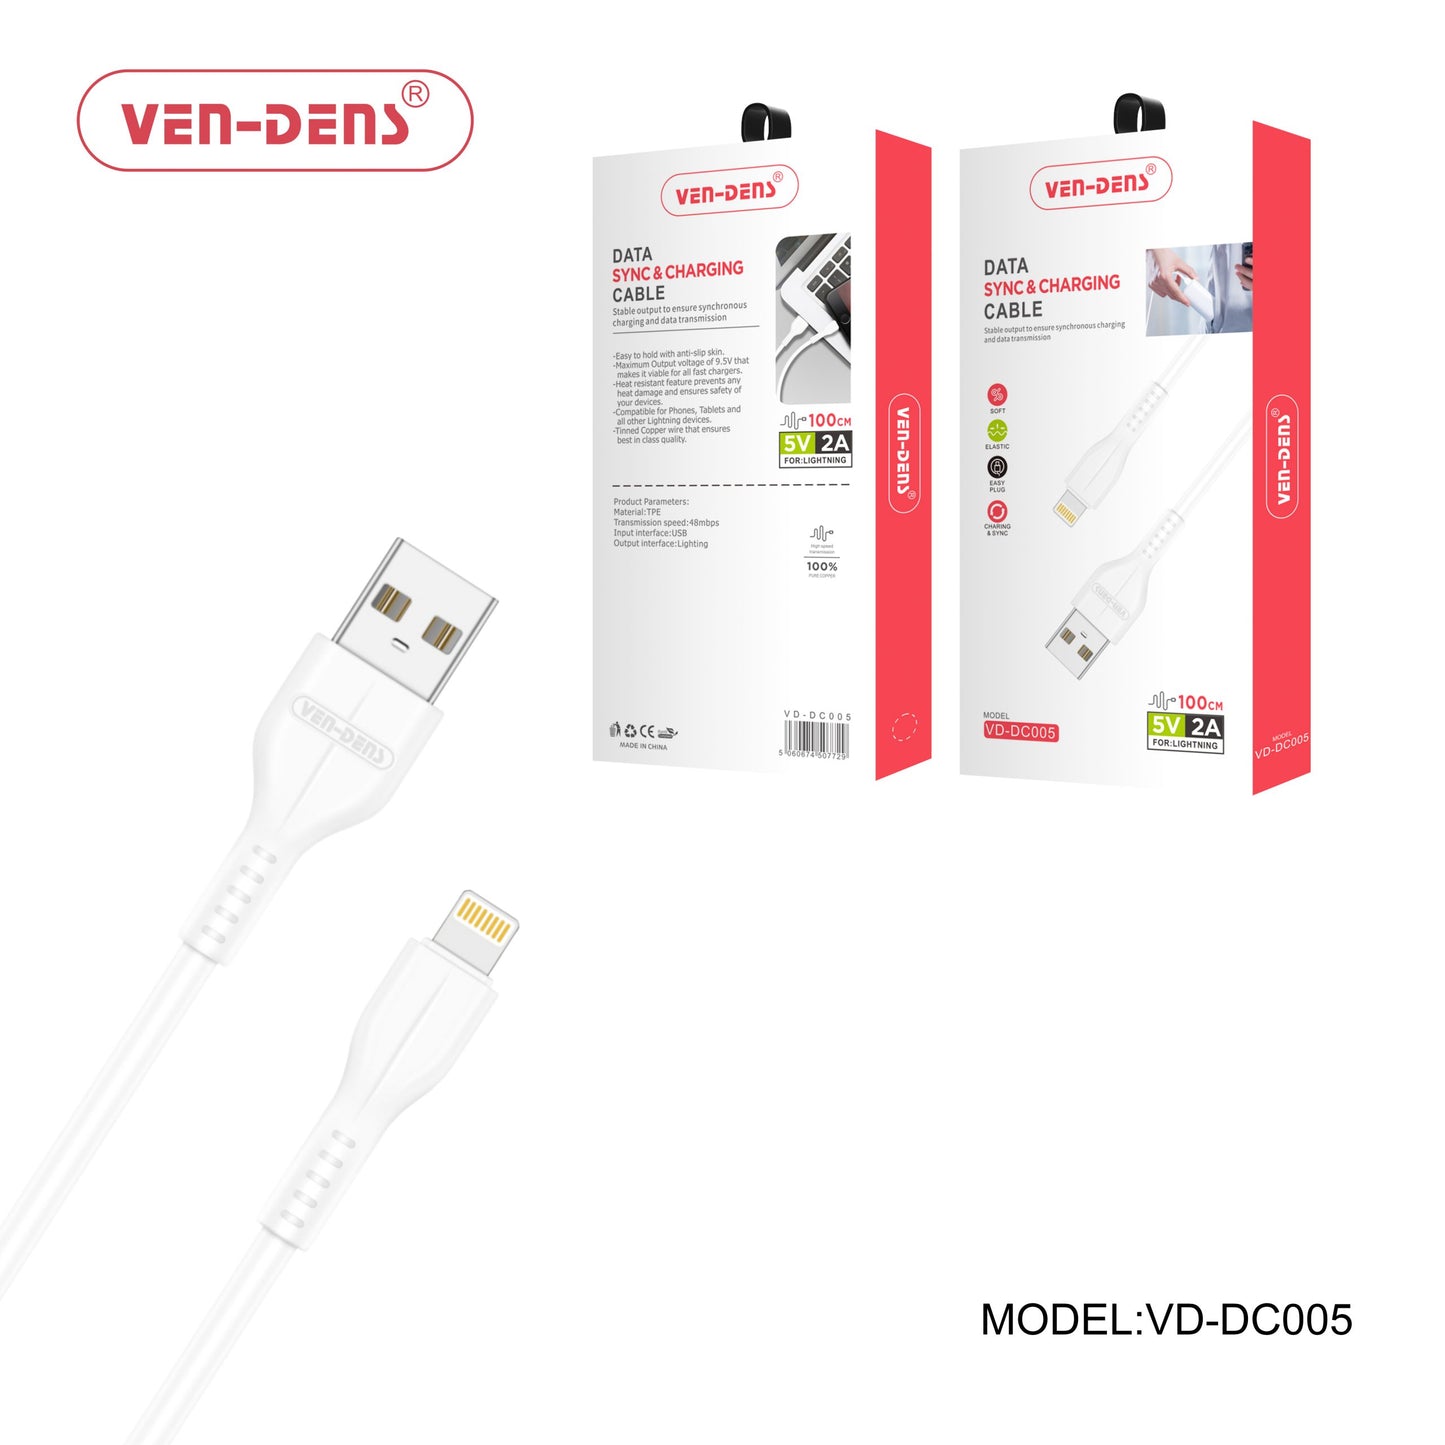 USB to Lightning Charging Cable 2A White (1 Metre)